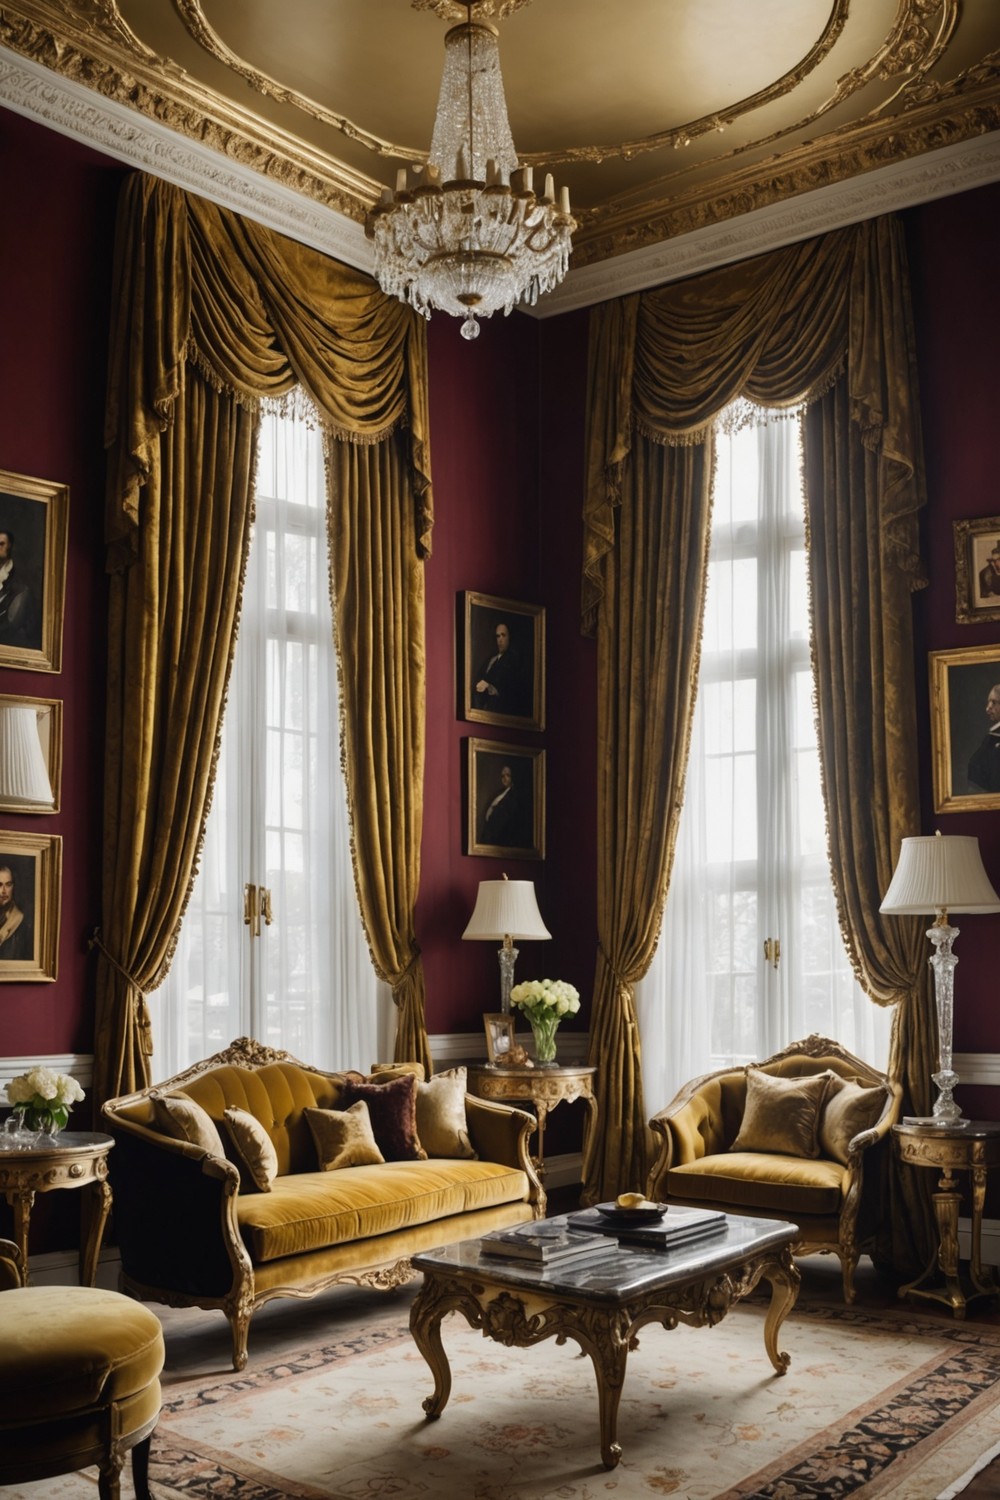 Soft, billowy Drapes: A Touch of Romance in Every Room